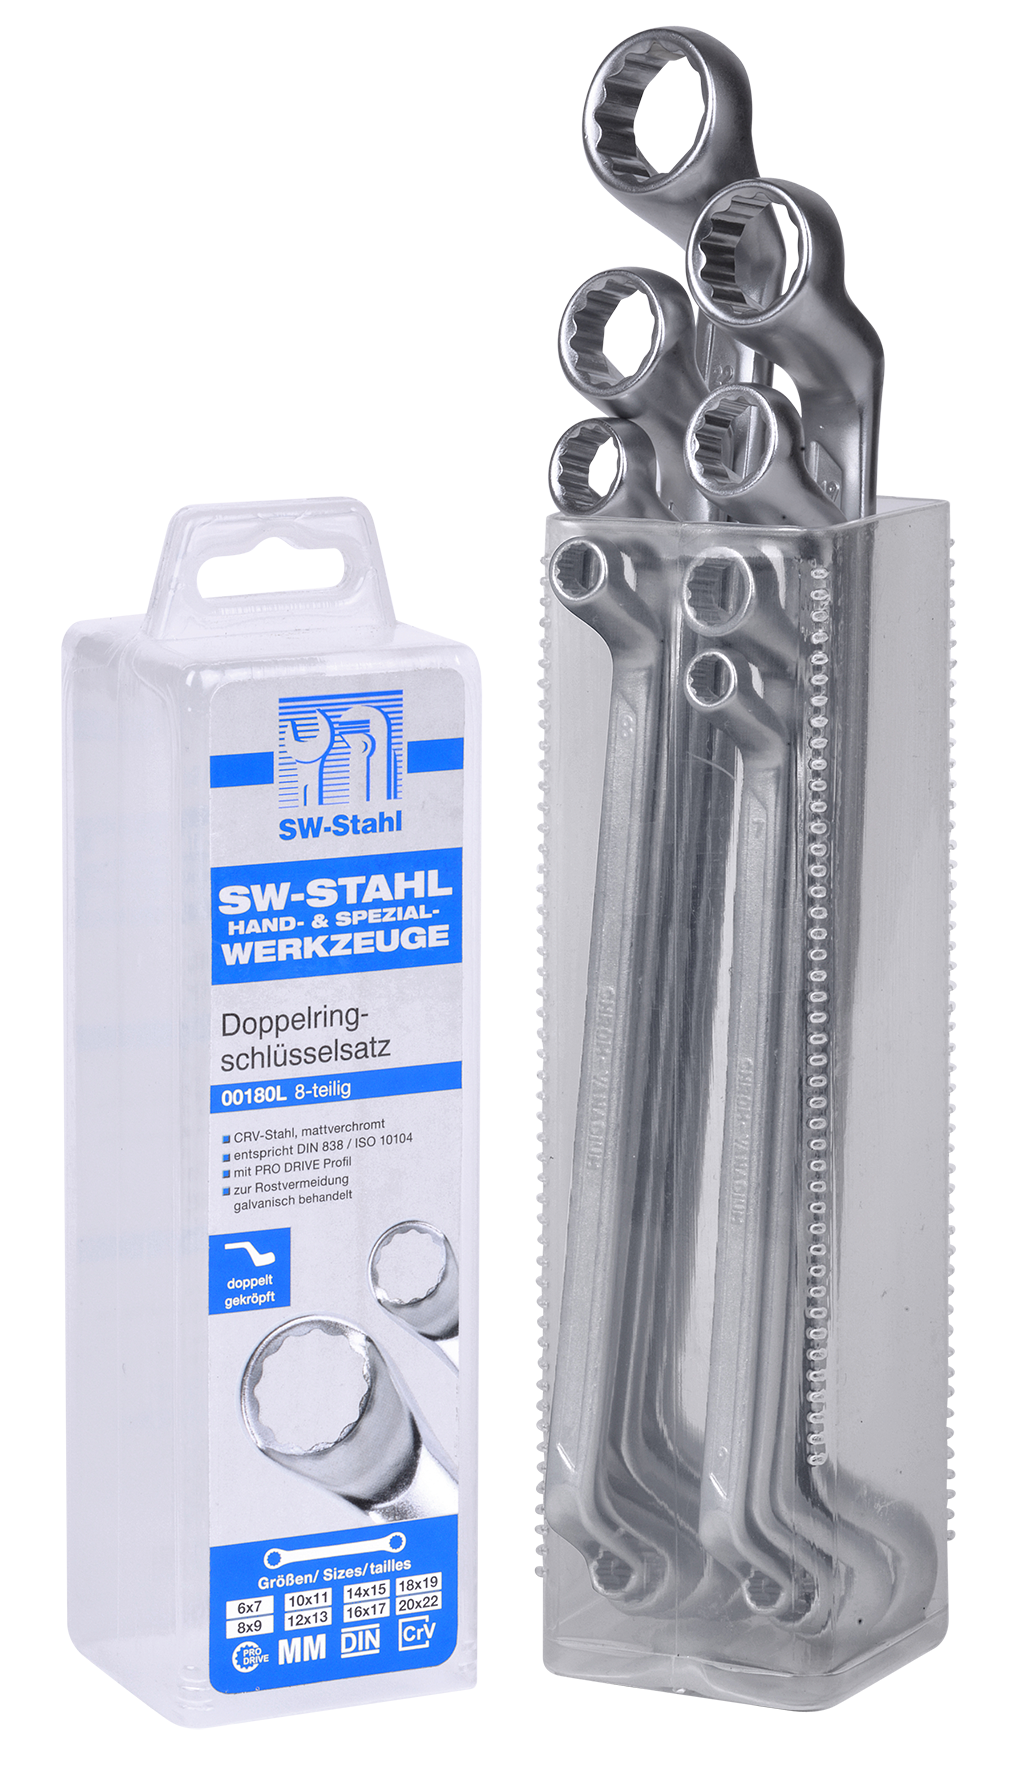 SWSTAHL Metric double-ring spanner set, DIN 838, cranked 00180L